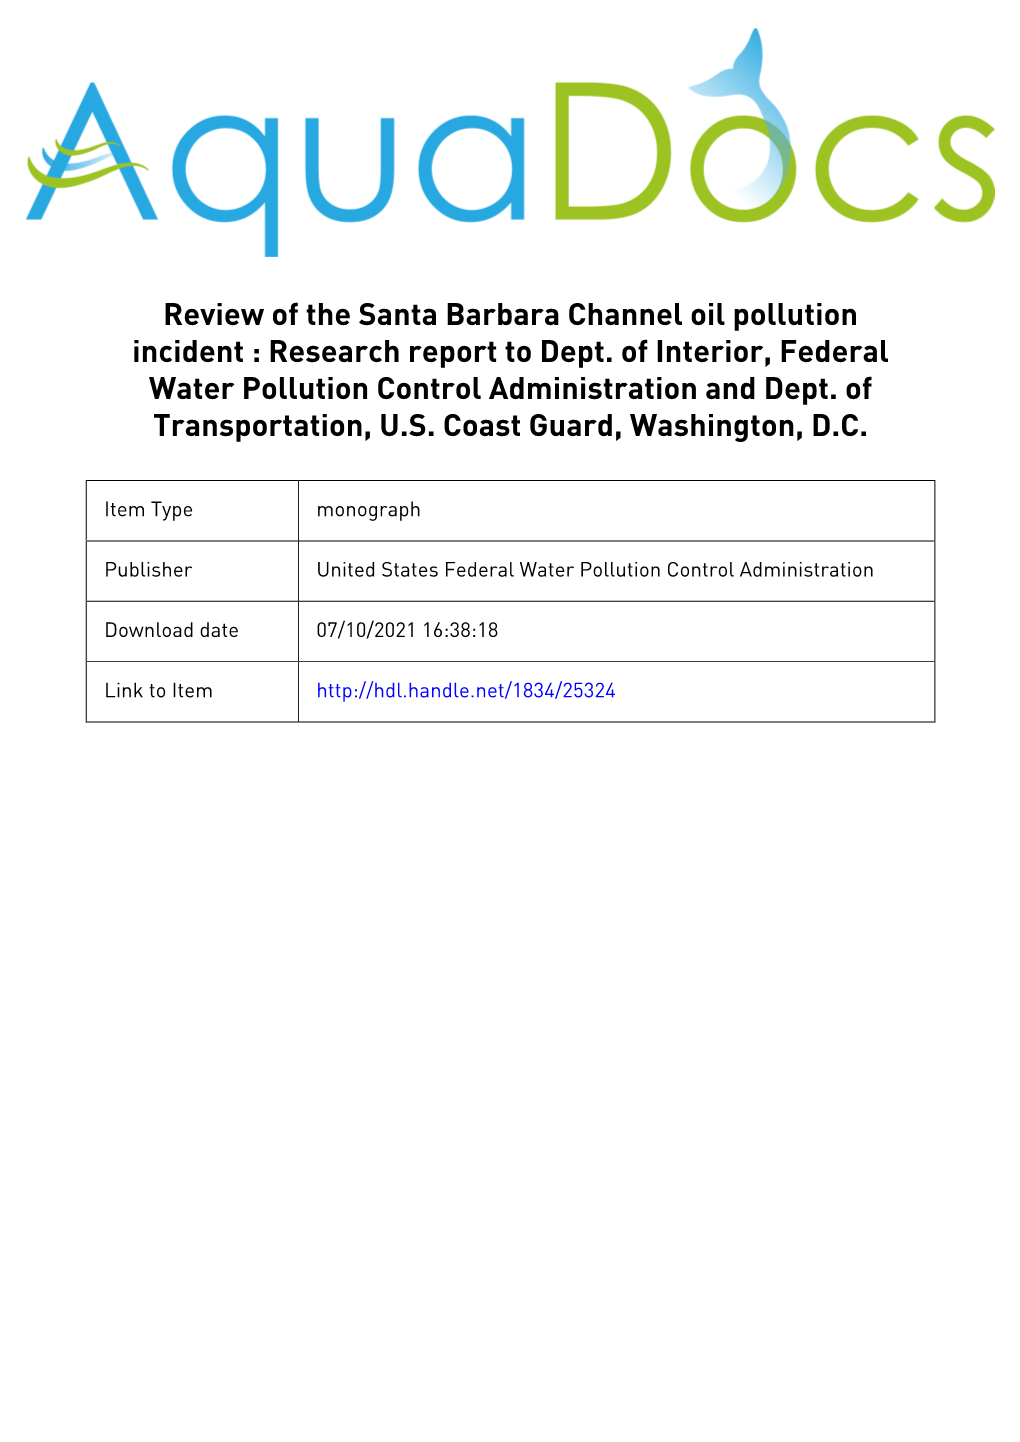 Review of the Santa Barbara Channel Oil Pollution Incident : Research Report to Dept